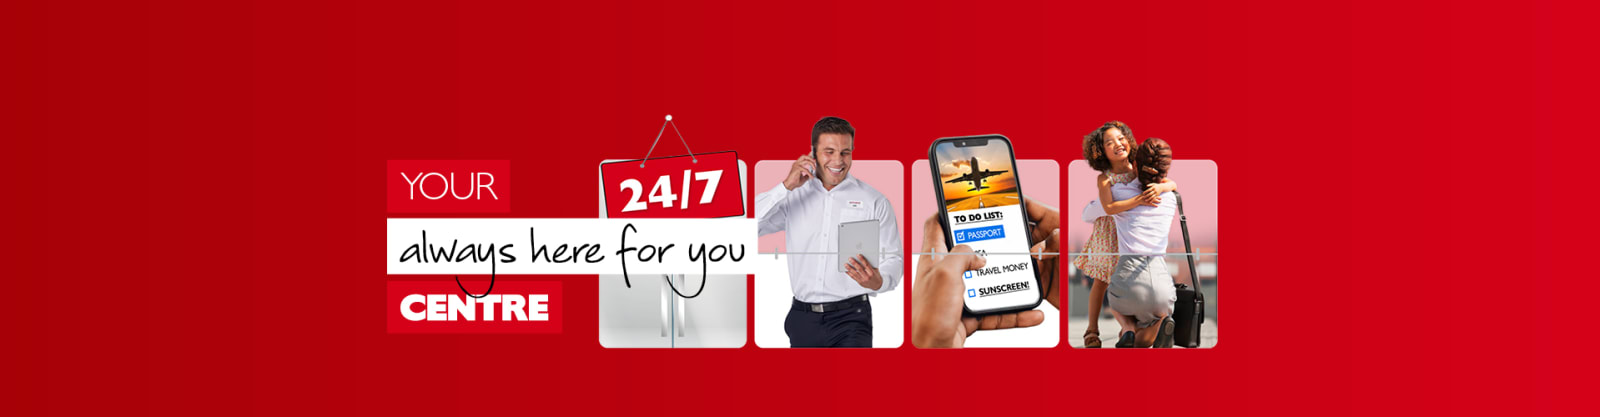 Your always here for you centre. Icons showing satisfied customers, 24/7 support, and great deals